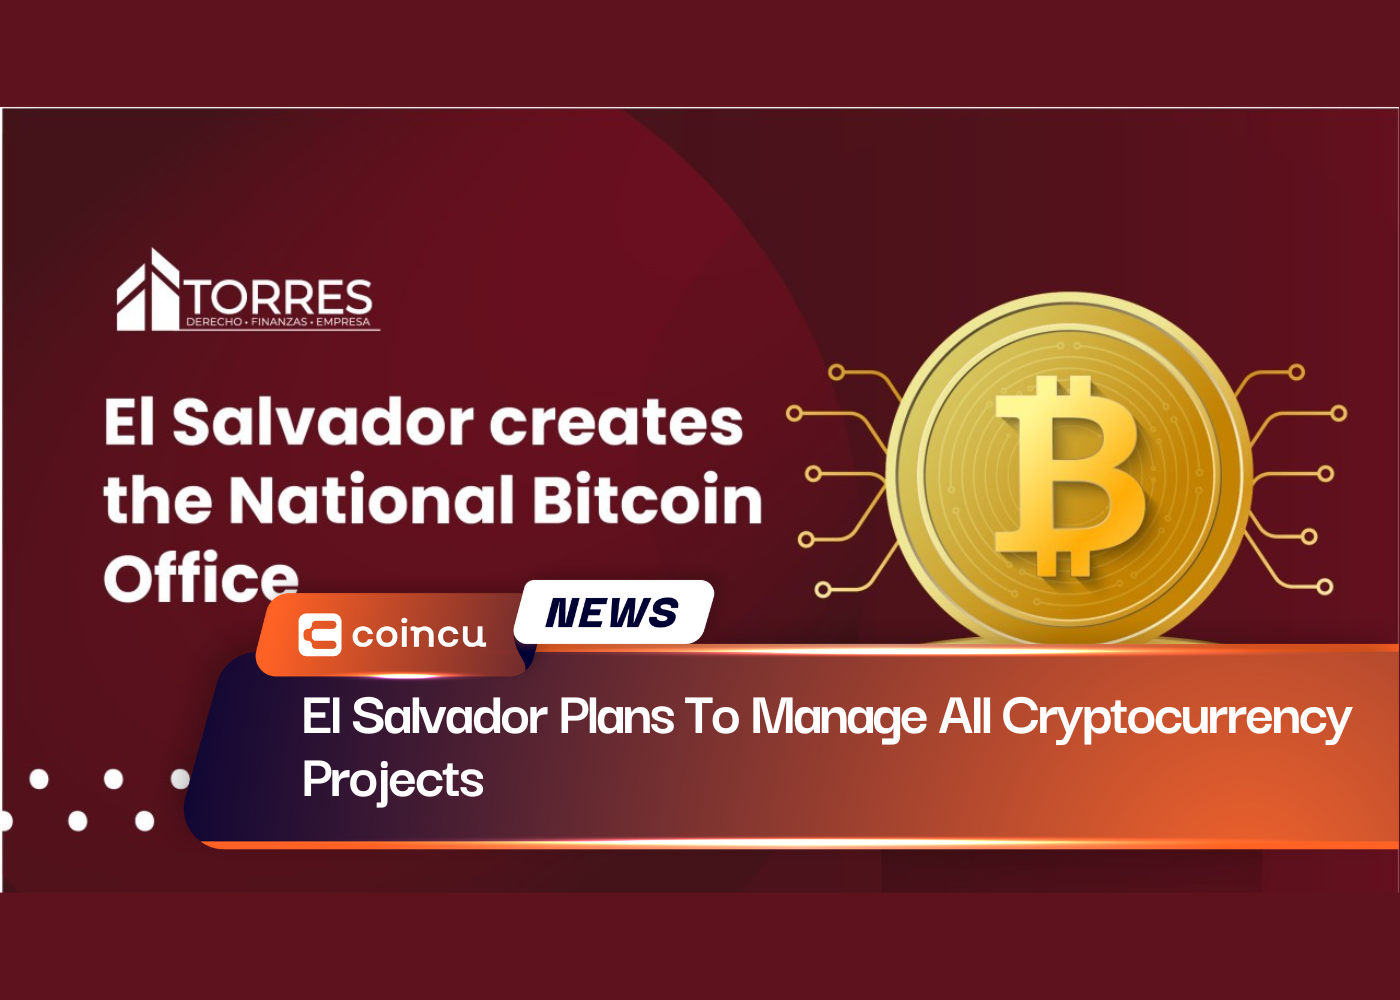 El Salvador Plans To Manage All Cryptocurrency Projects